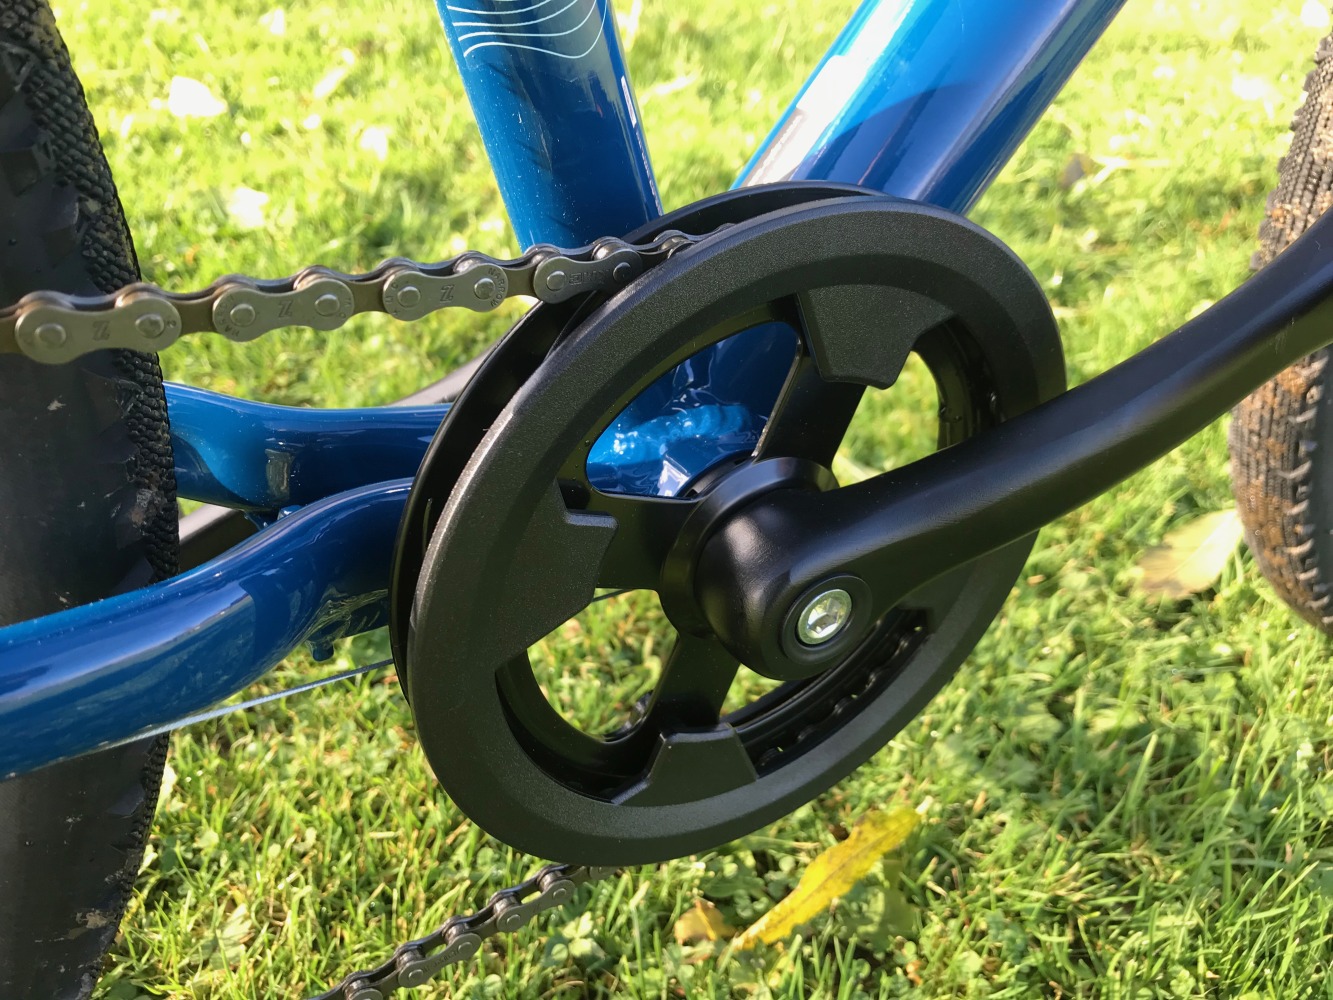 B'Twin Riverside 900 26 inch wheel kids bike - close up photo of the single chainring which makes changing gears easier